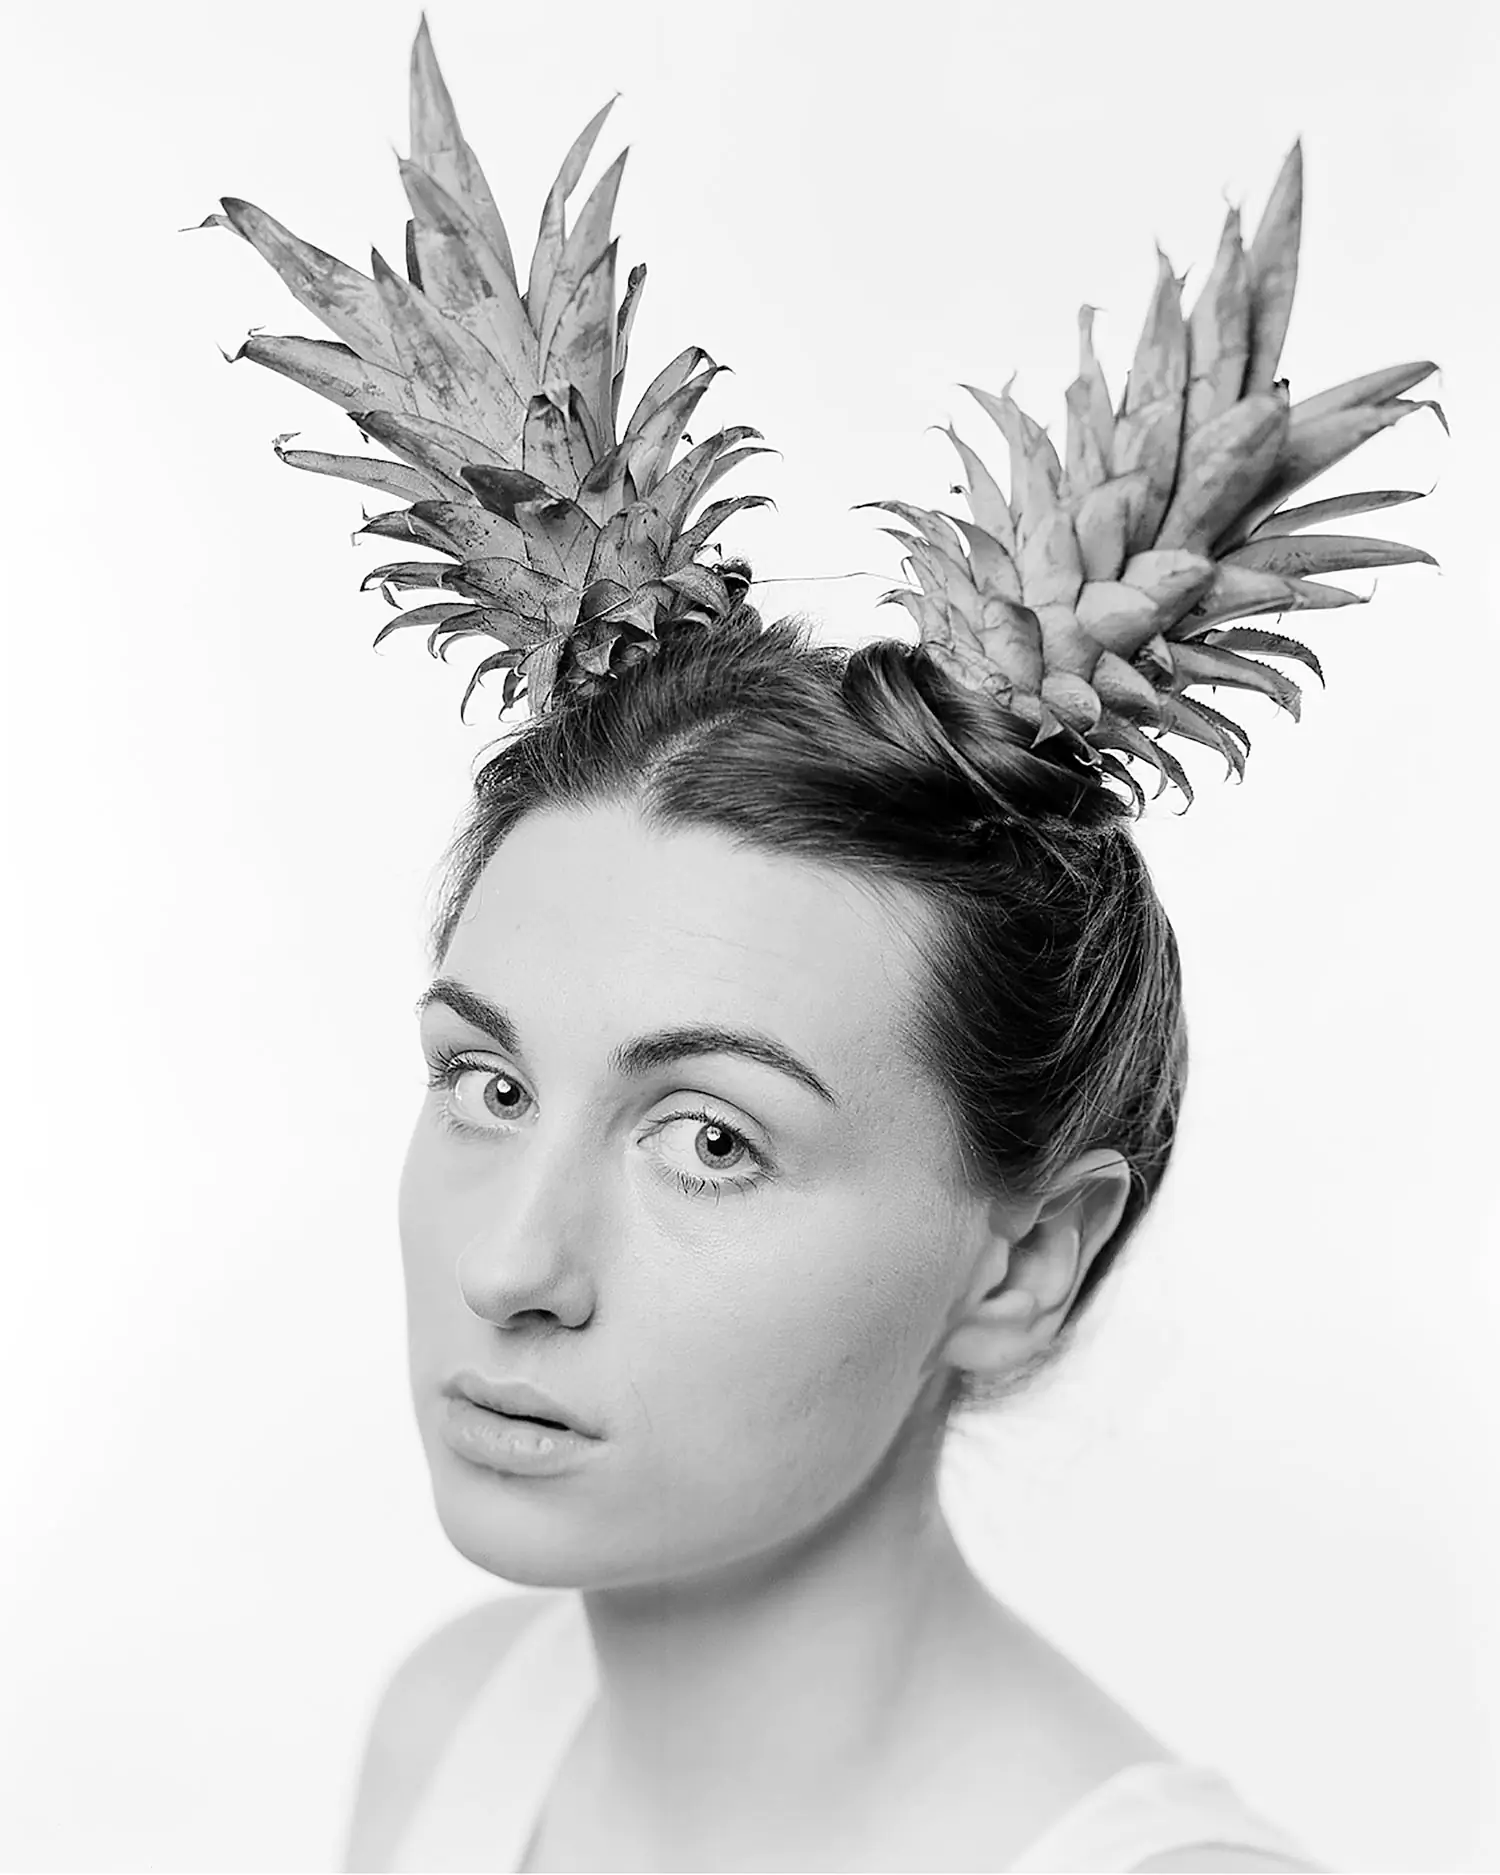 Large format portrait of young woman with pineapples on head